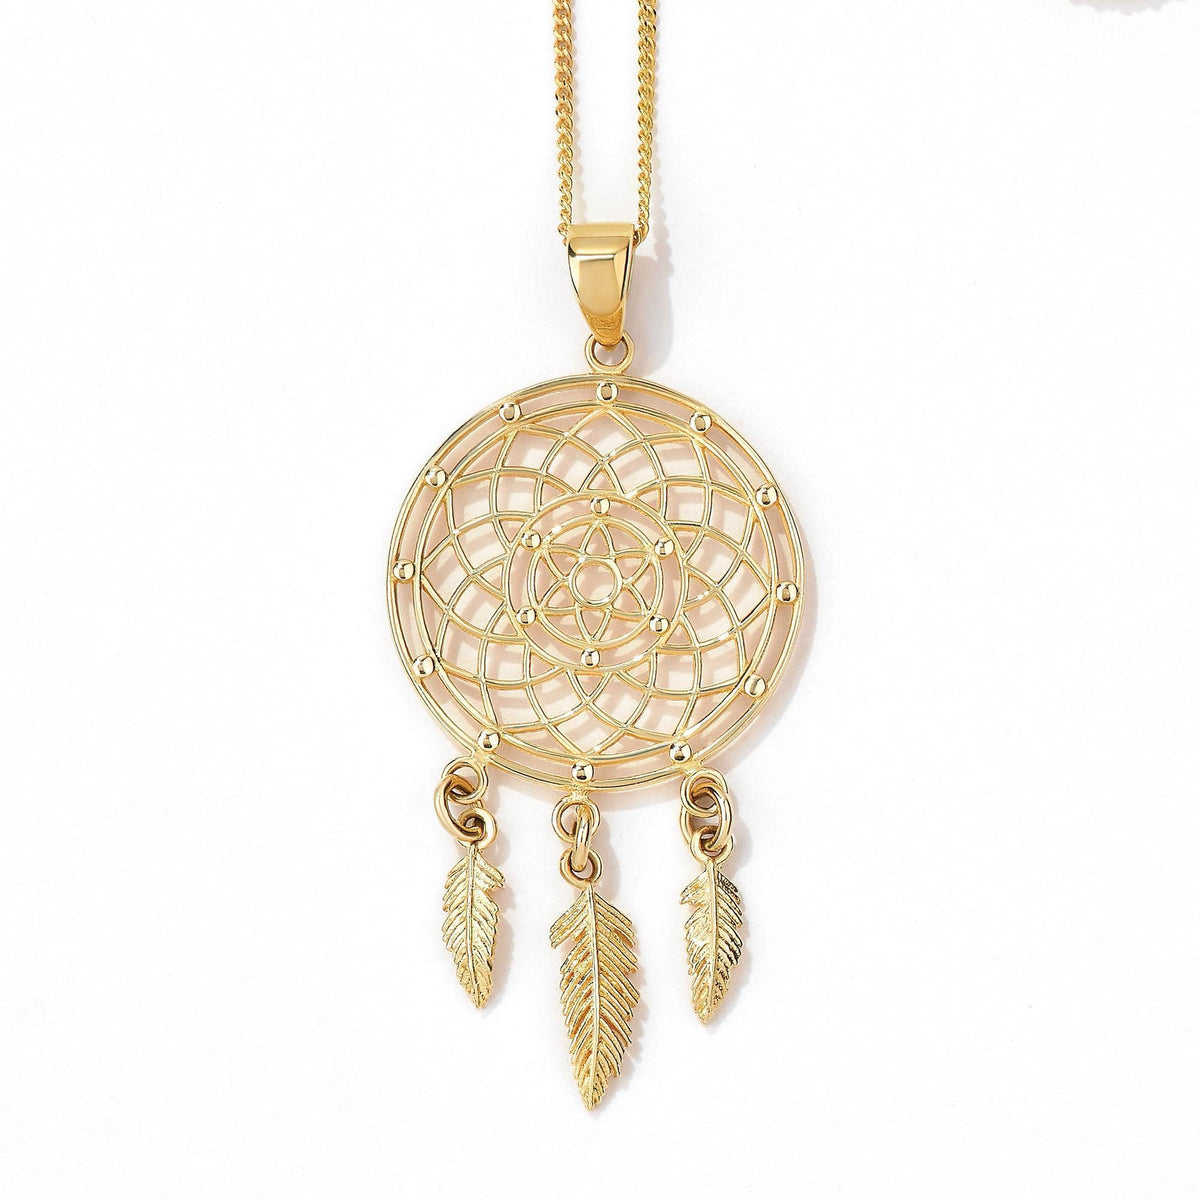 Dreamcatcher Pendant in 9ct Yellow Gold - Wallace Bishop